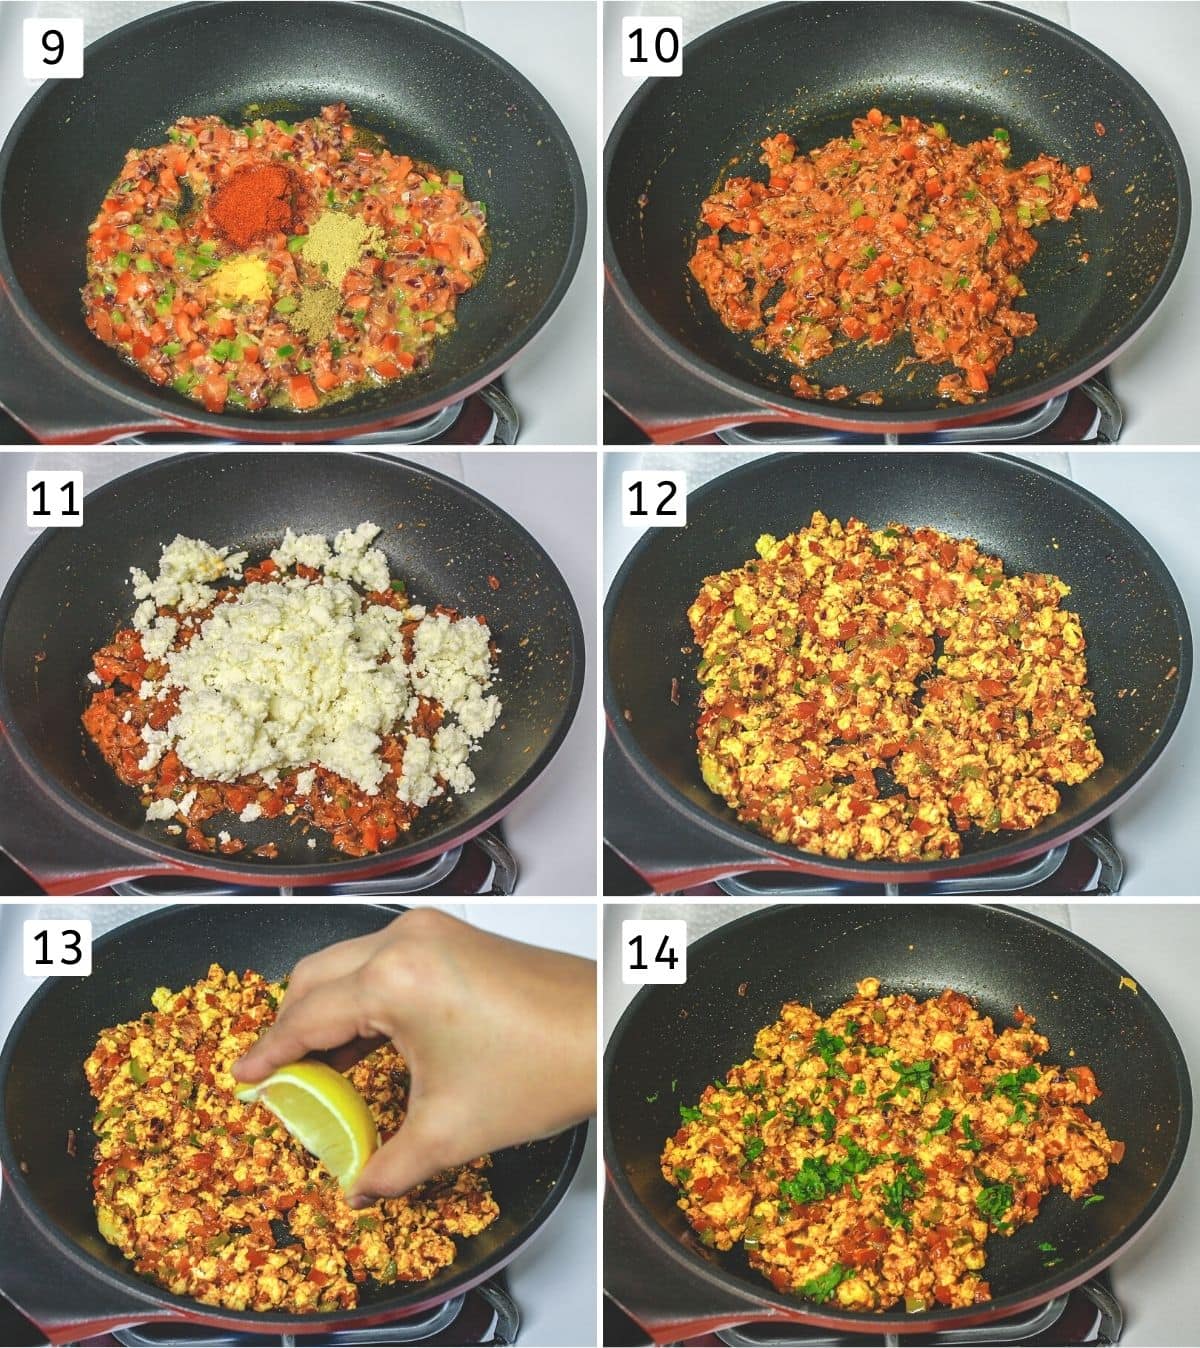 Collage of 6 images showing adding spice powders, adding grated paneer, lemon juice and cilantro.